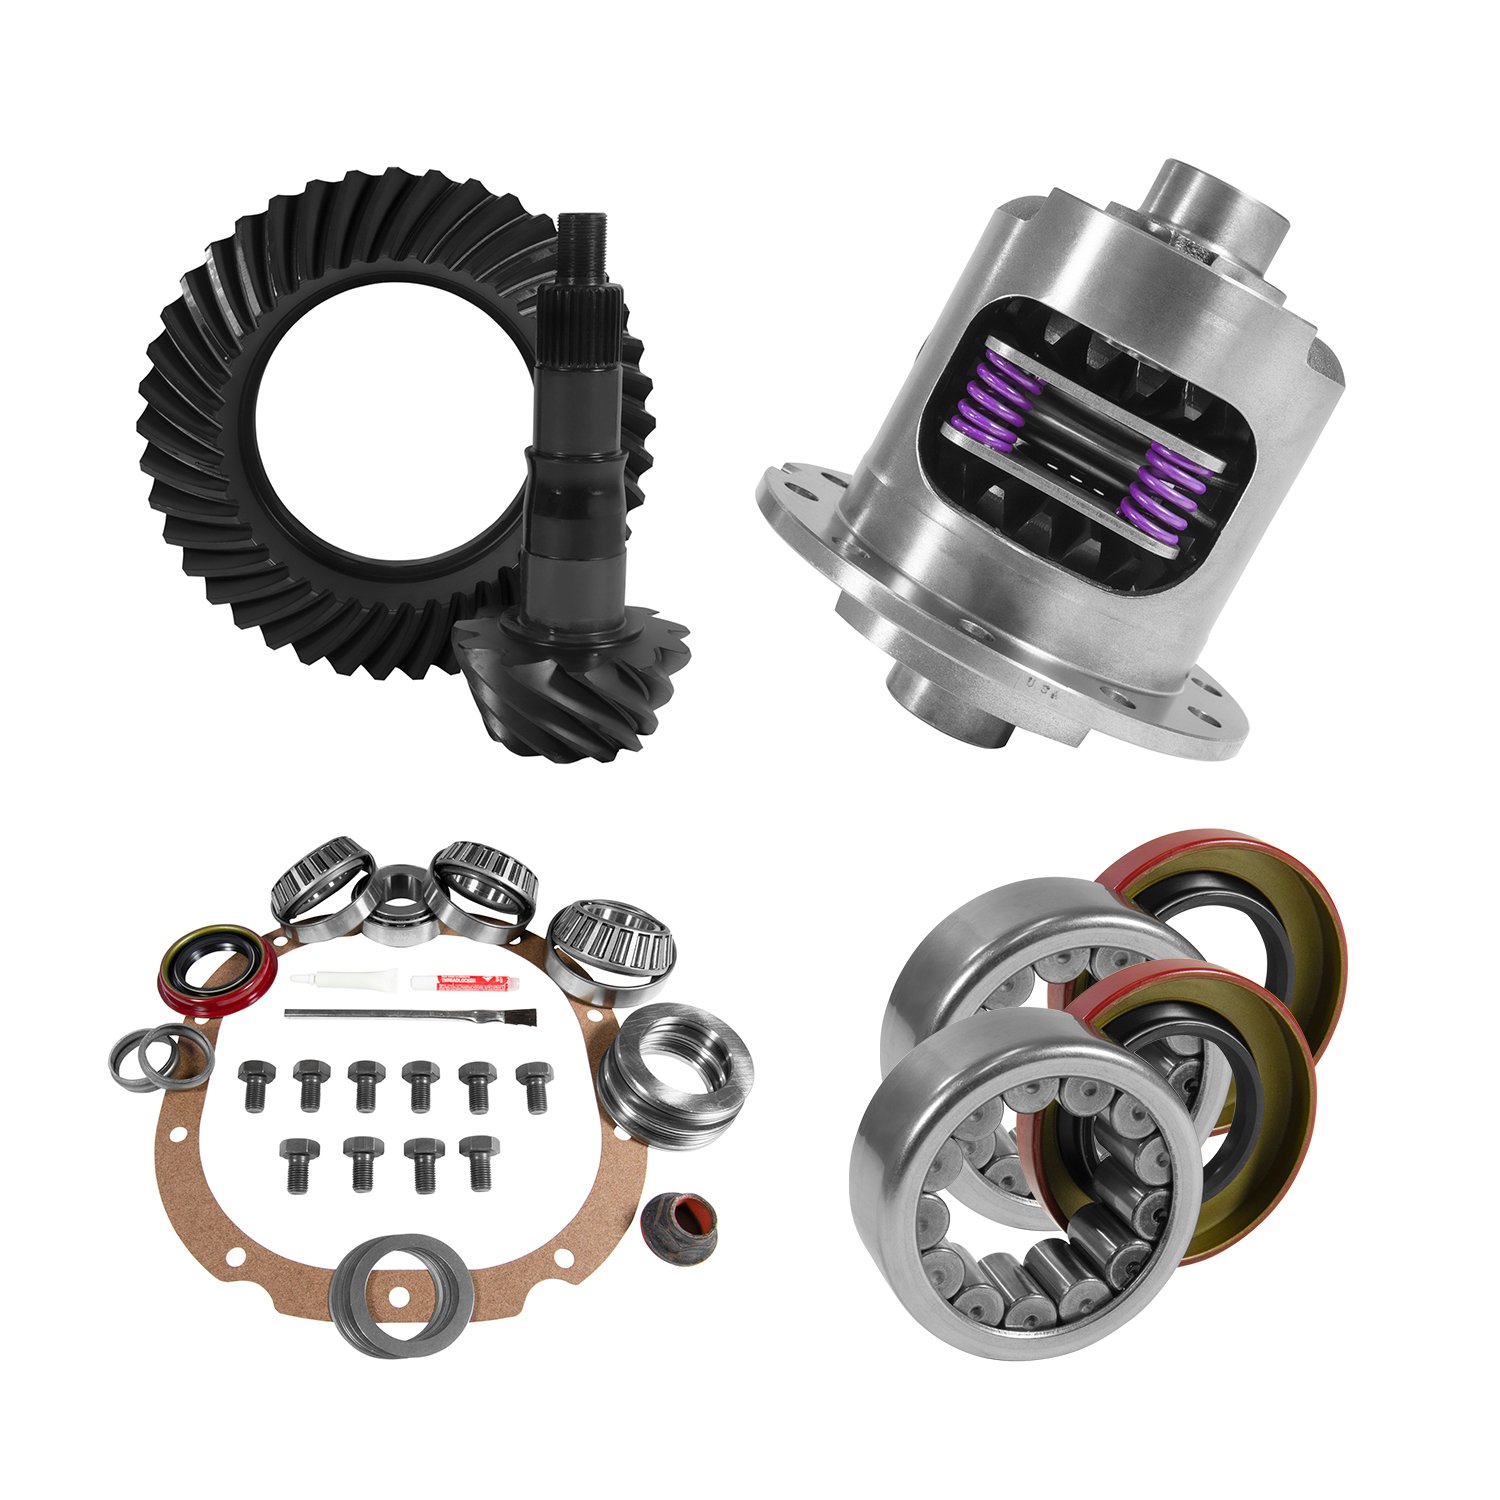 8.8 in. Ford 3.73 Rear Ring & Pinion, Install Kit, 31Spl Posi, 2.99 in. Axle Bearings